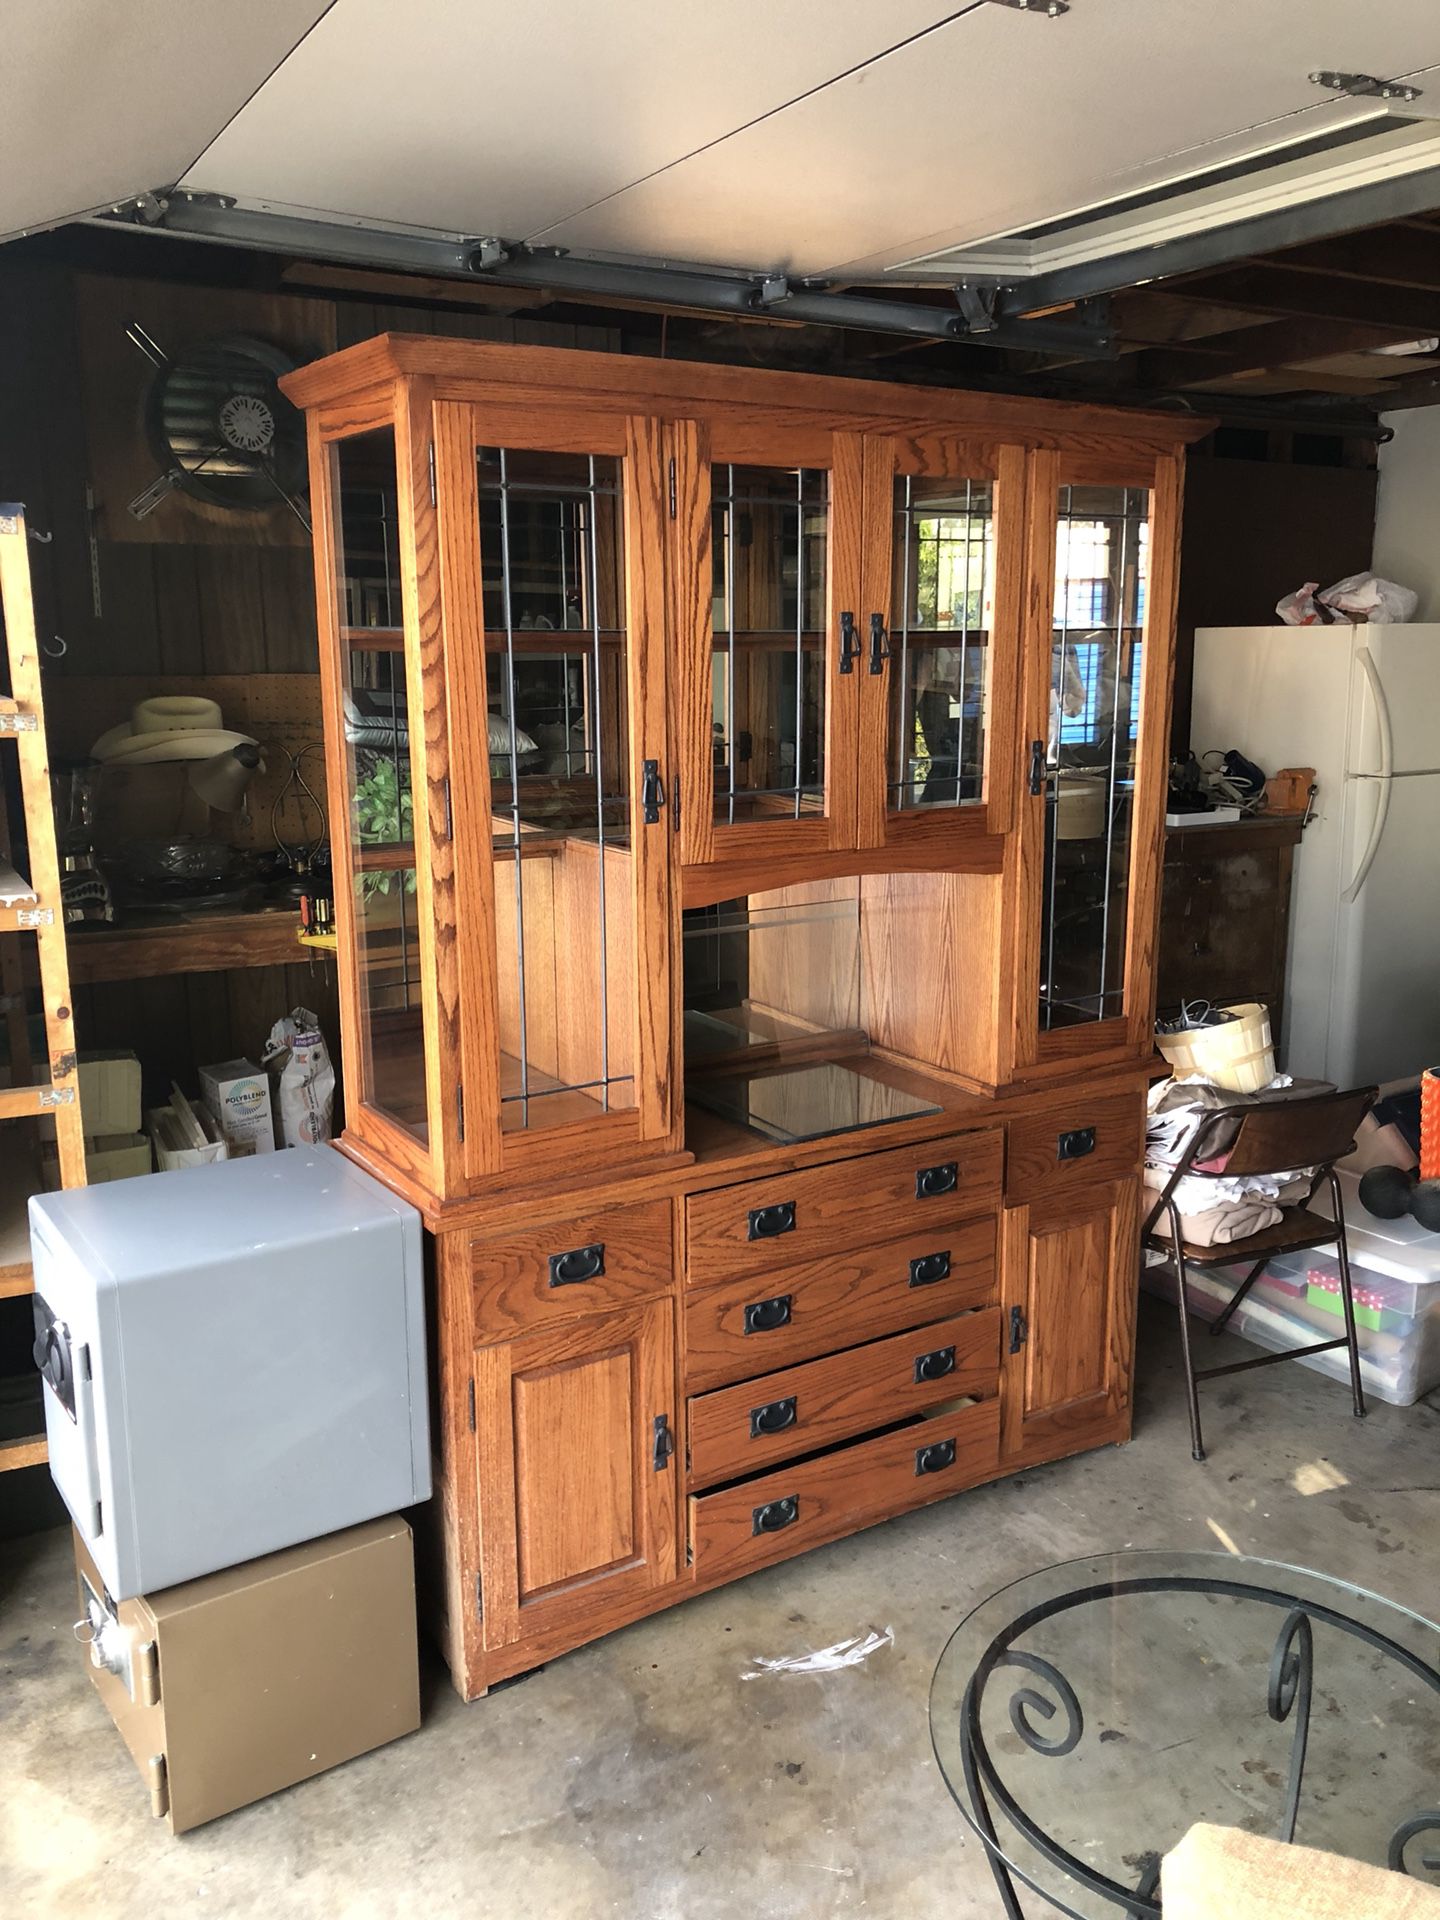 Estate/Garage Sale!!! 7/7/17. Everything priced to sell